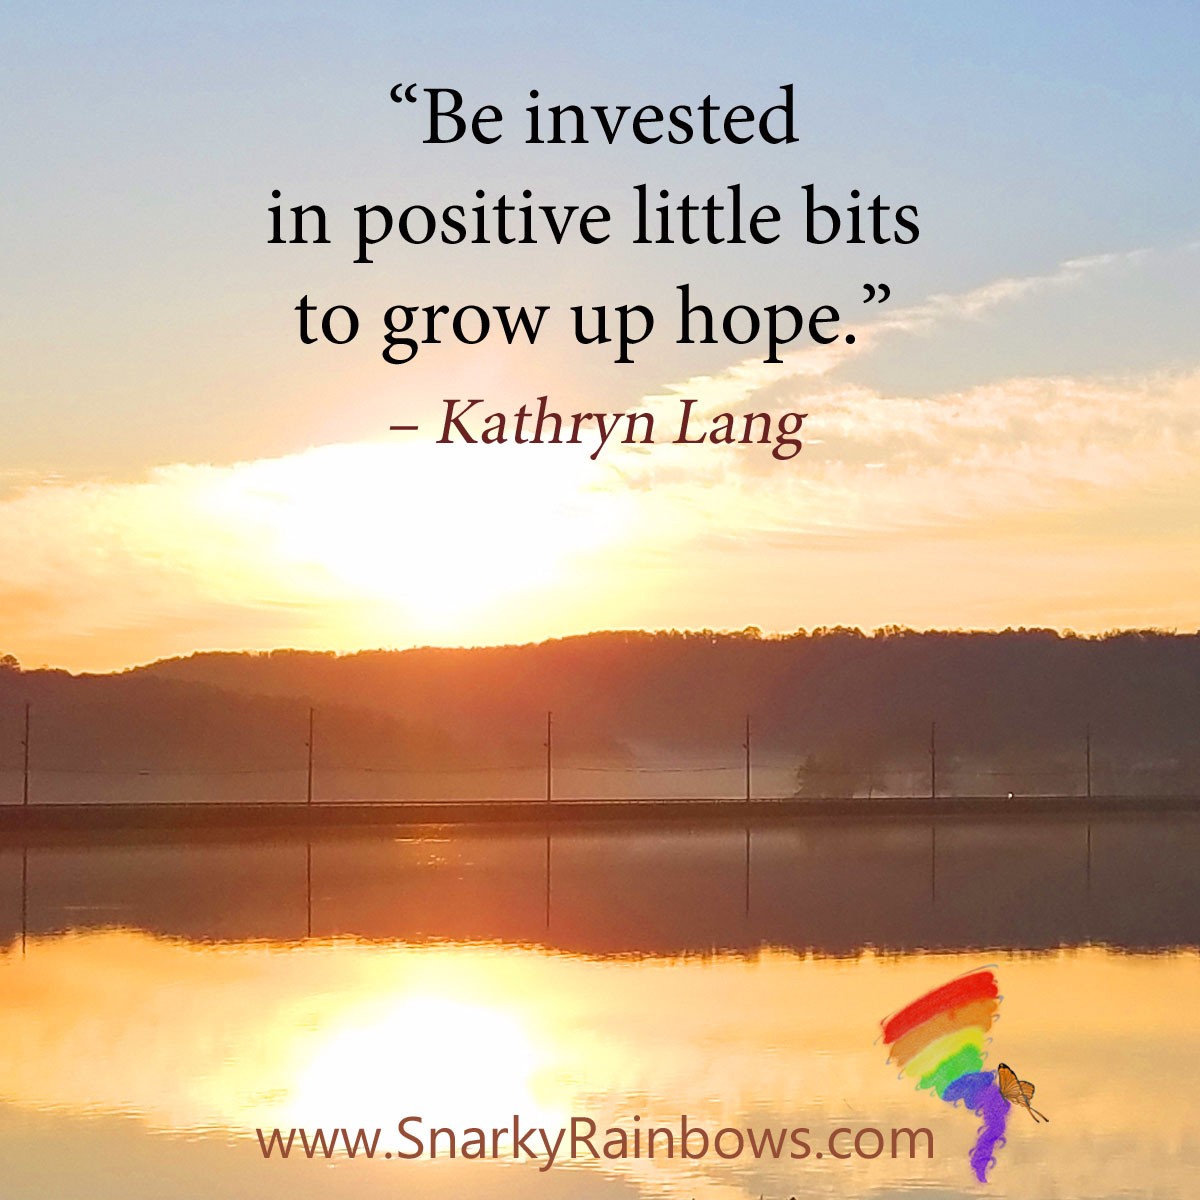 #Quoteoftheday - invested in positive little bits